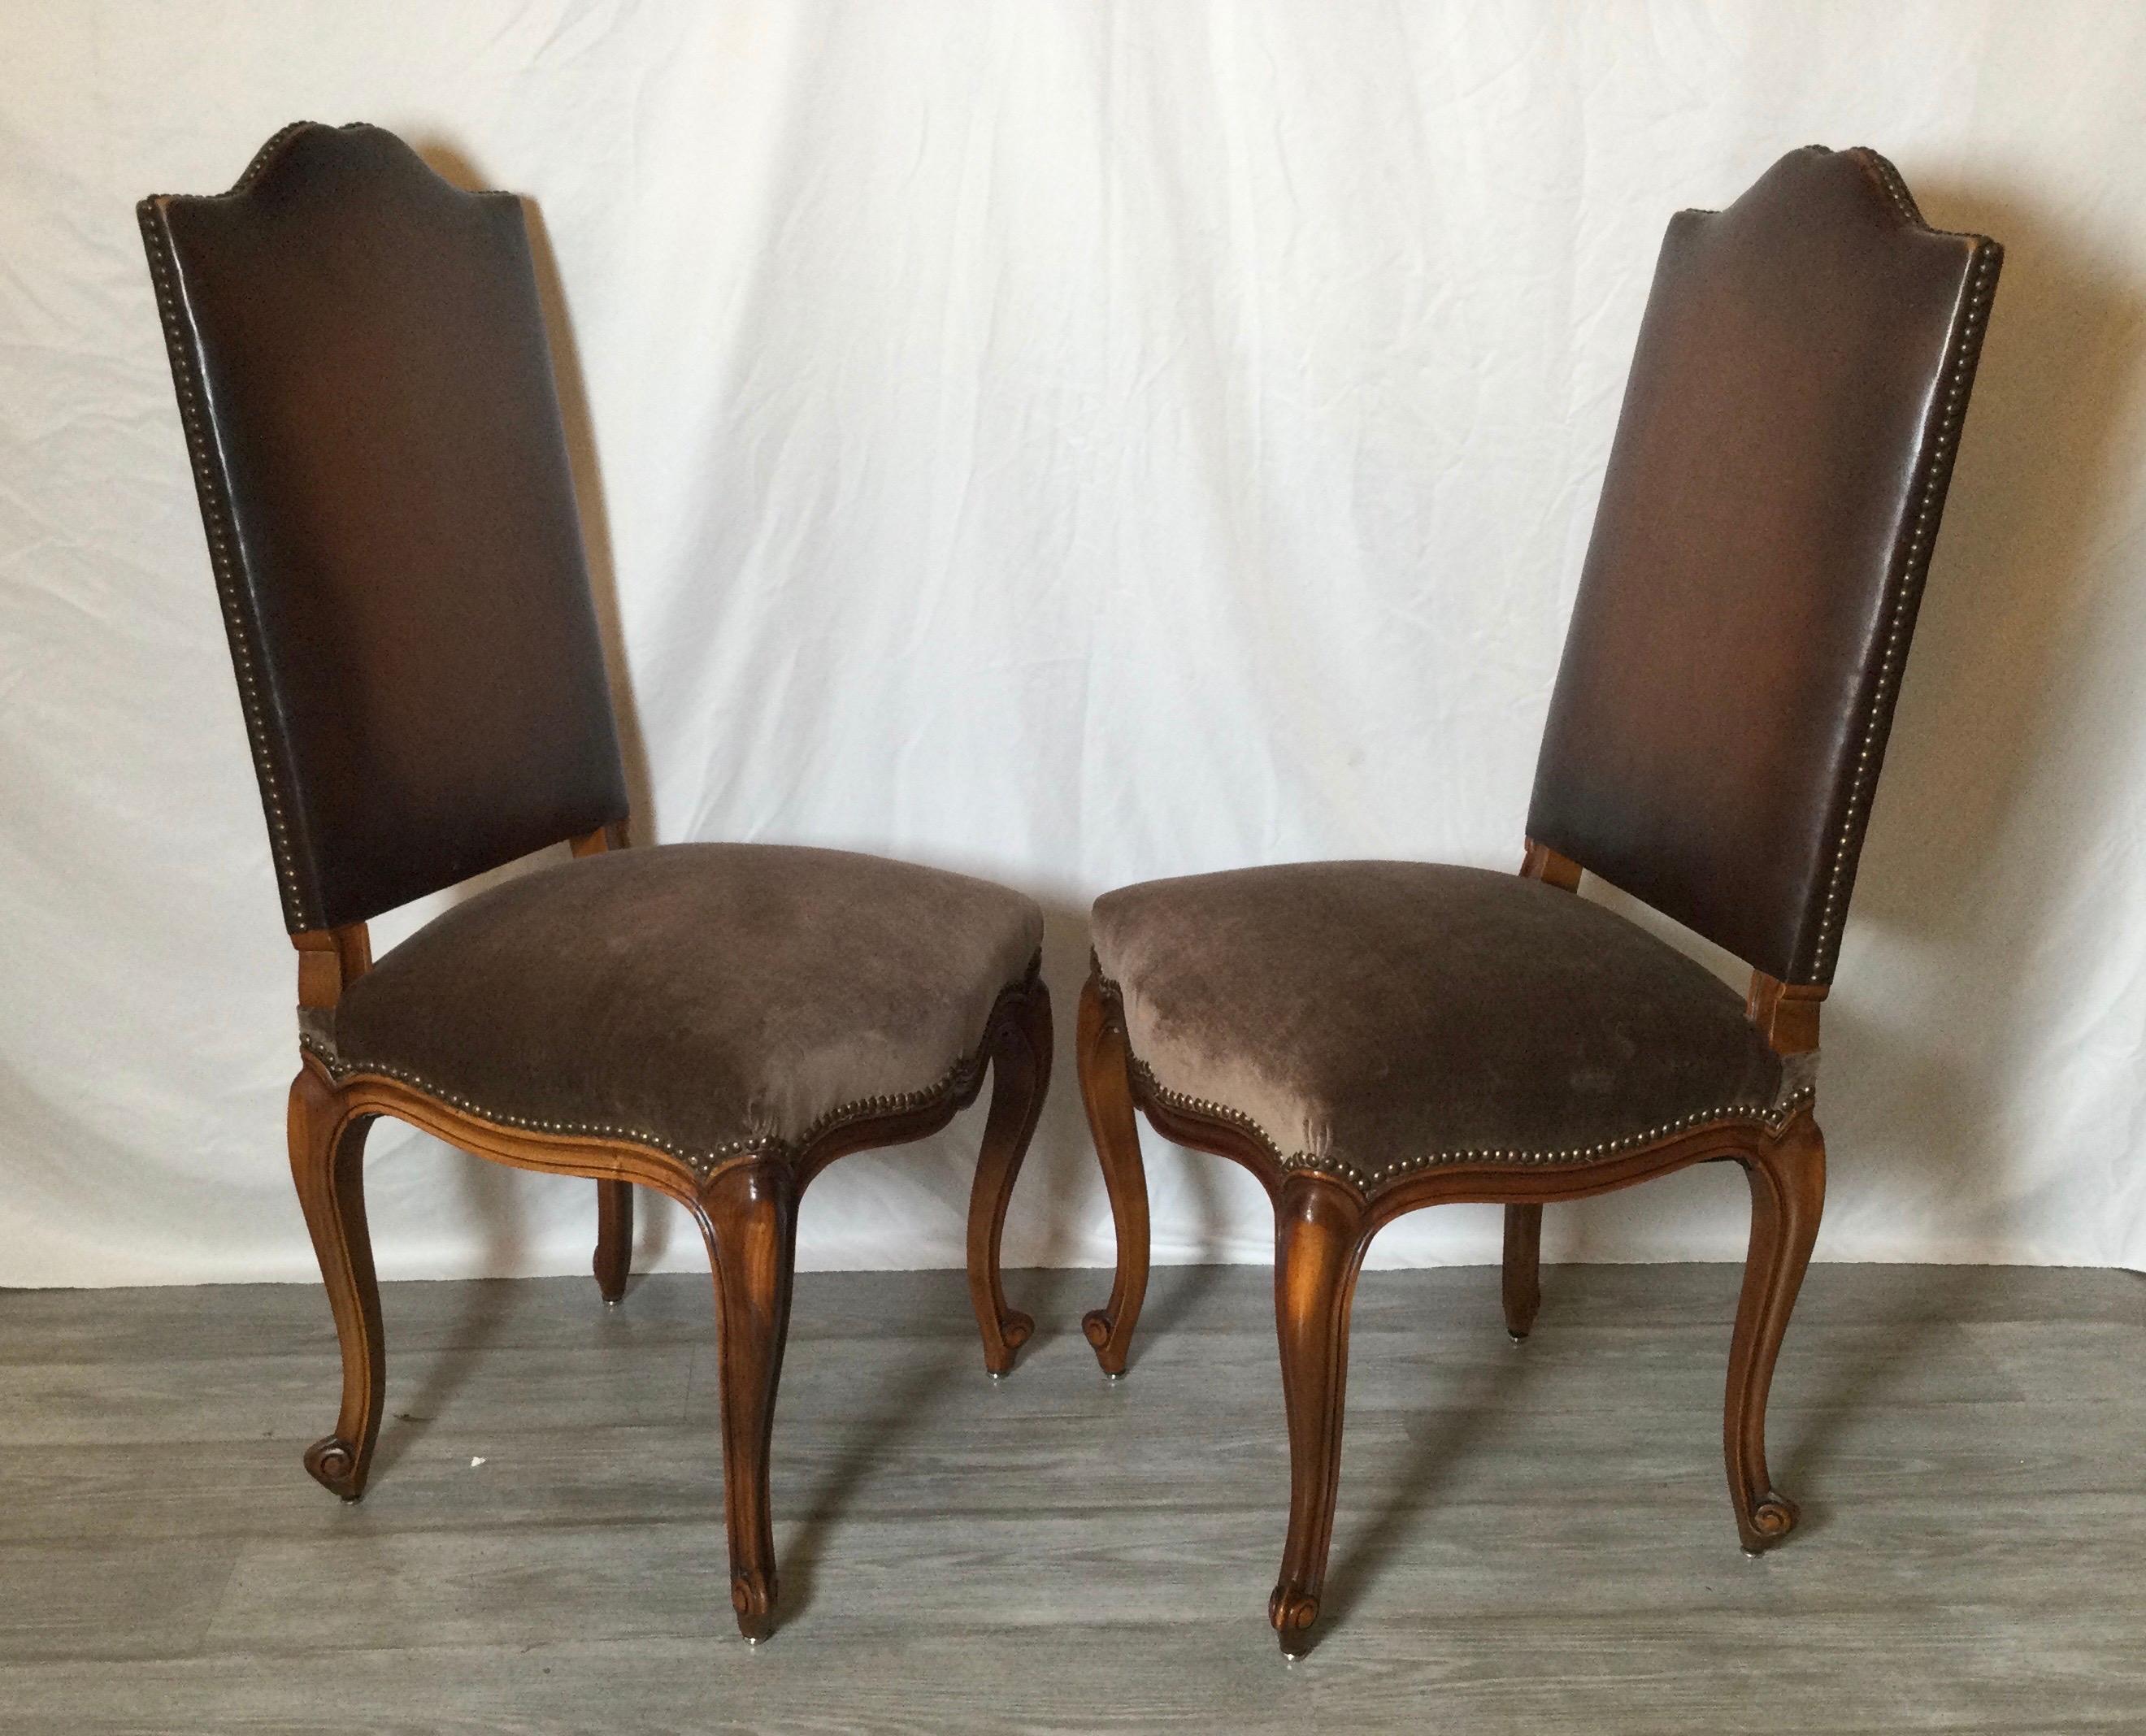 Set of six walnut country French chairs, brown leather back, brown velvet seats. 
Original leather backs with brass tacks and new brown velvet upholstery on the seats.
Dimensions: